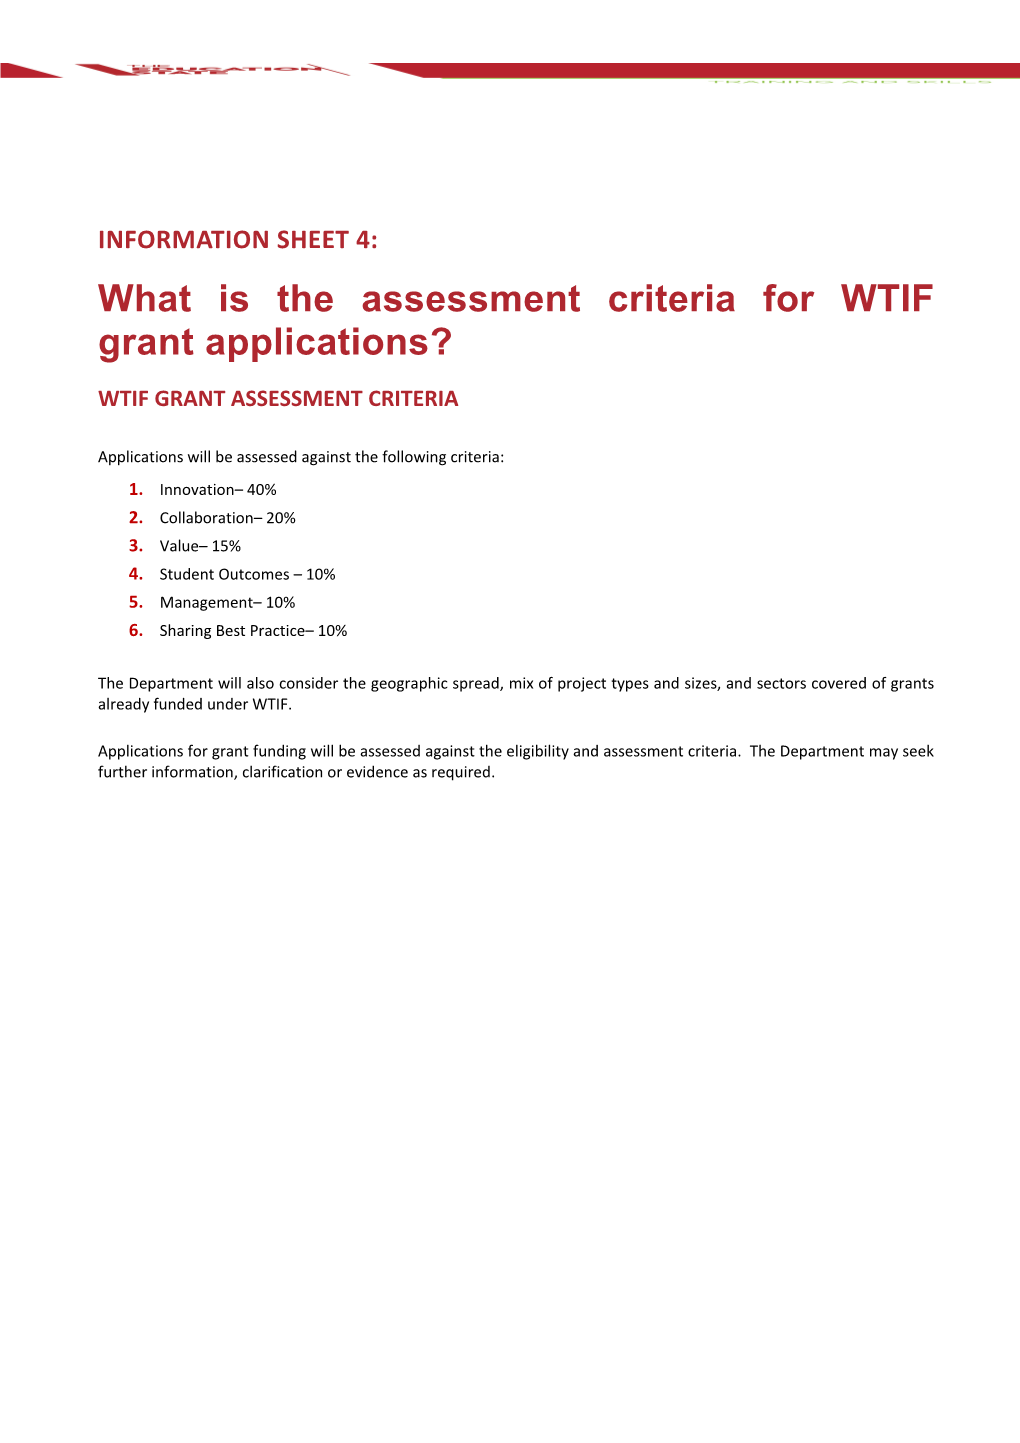 What Is the Assessment Criteria for WTIF Grant Applications?